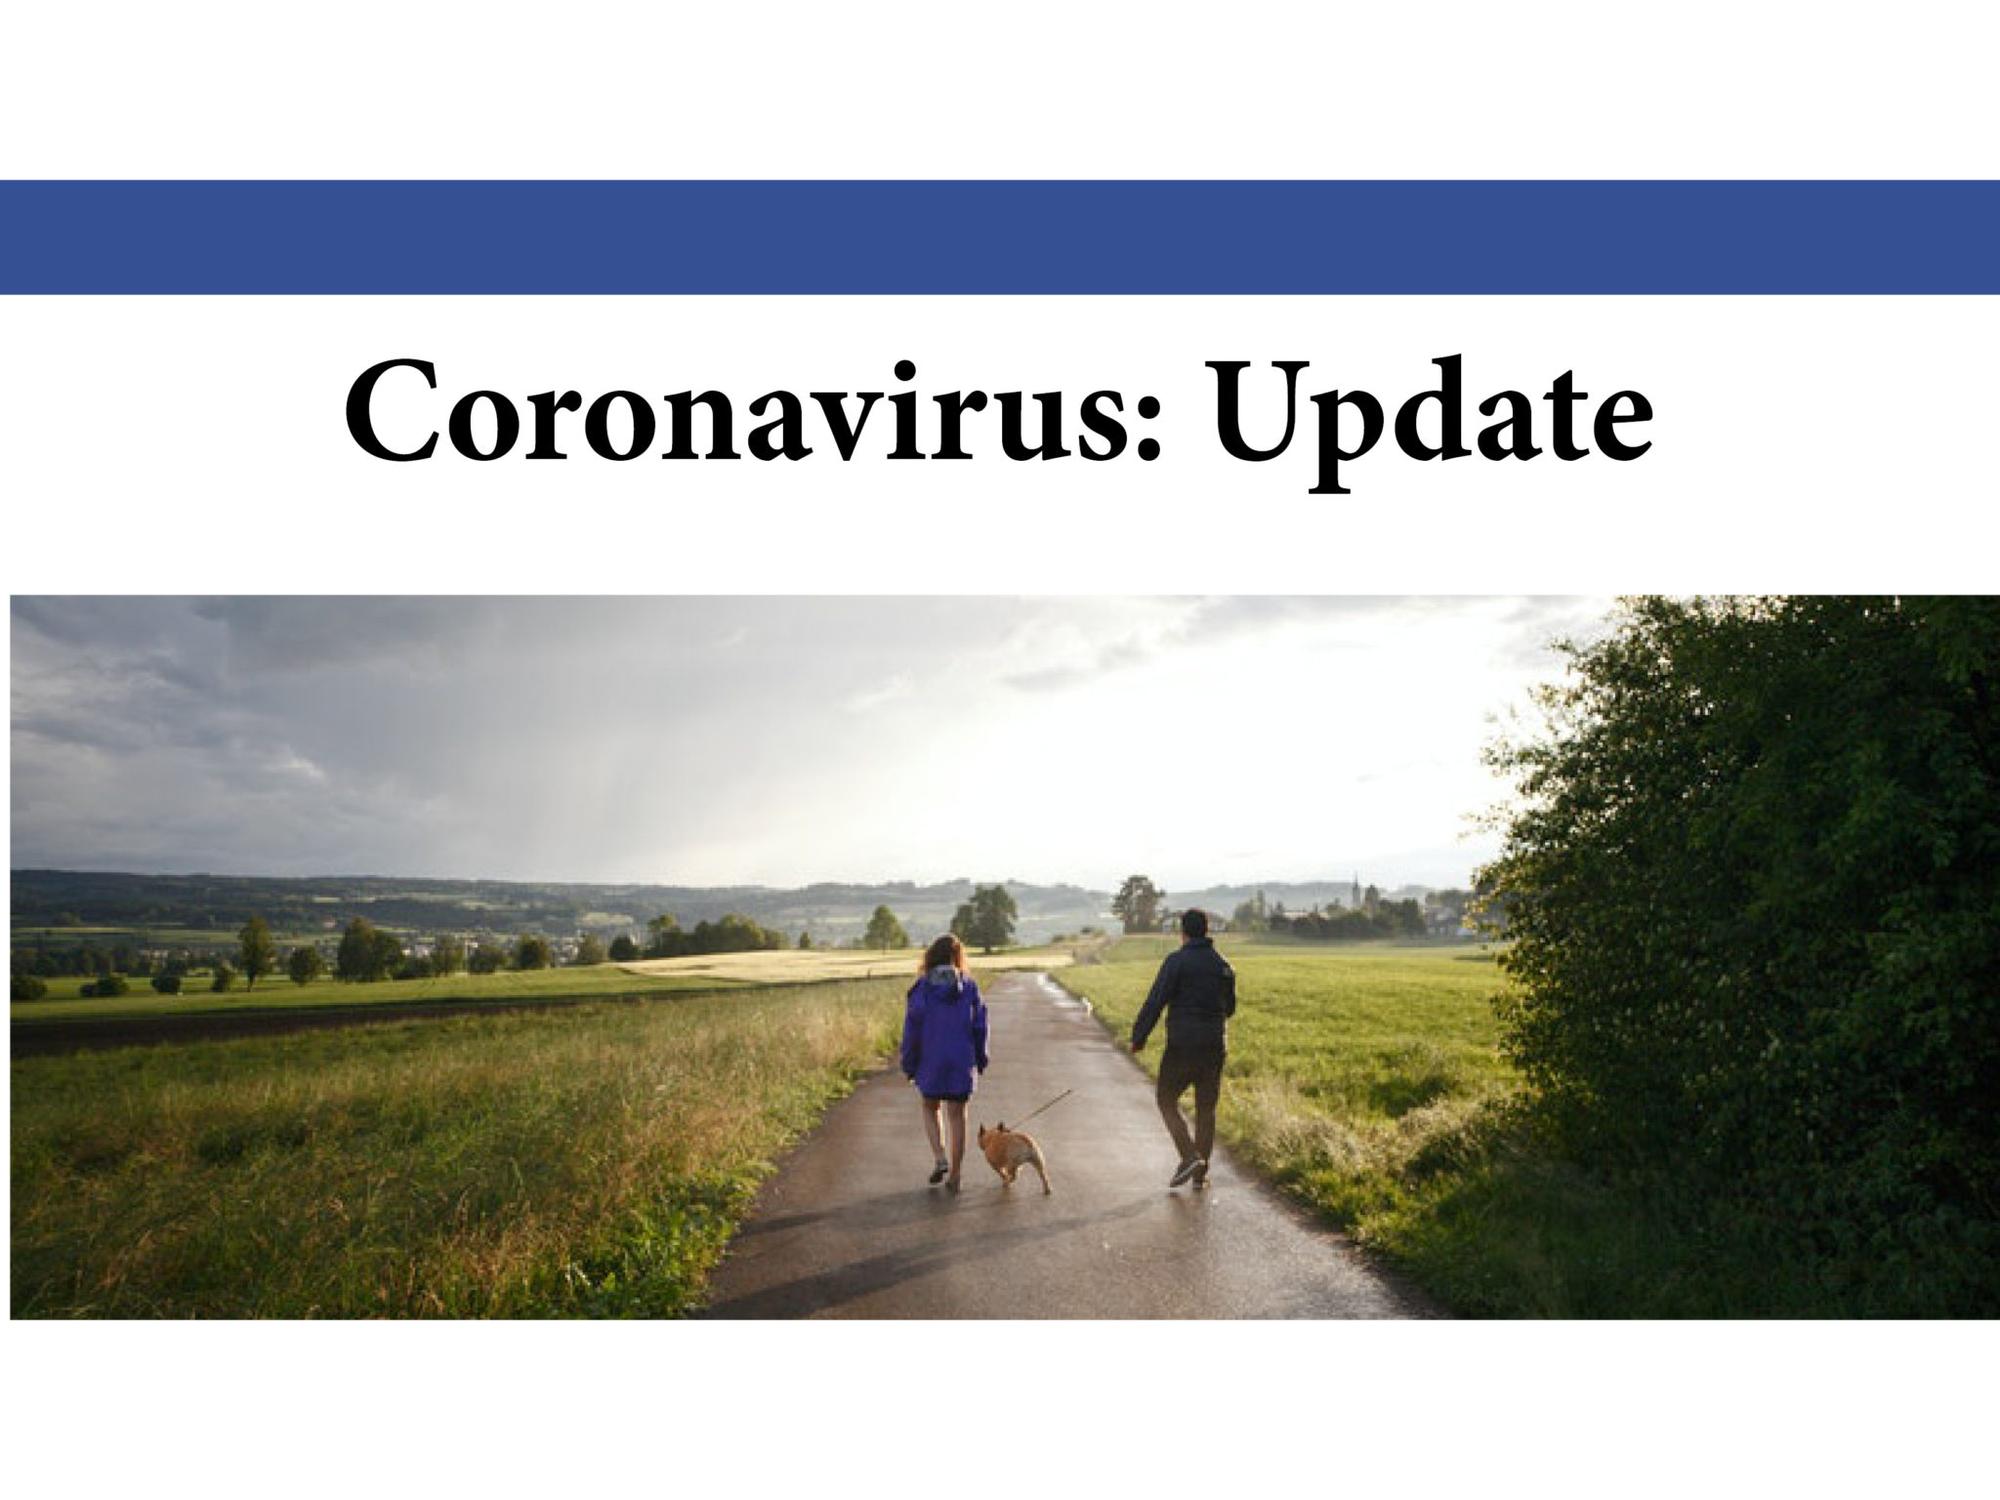 Champlain residents who see anyone contravening special measures to contain coronavirus: contact township’s by-law department